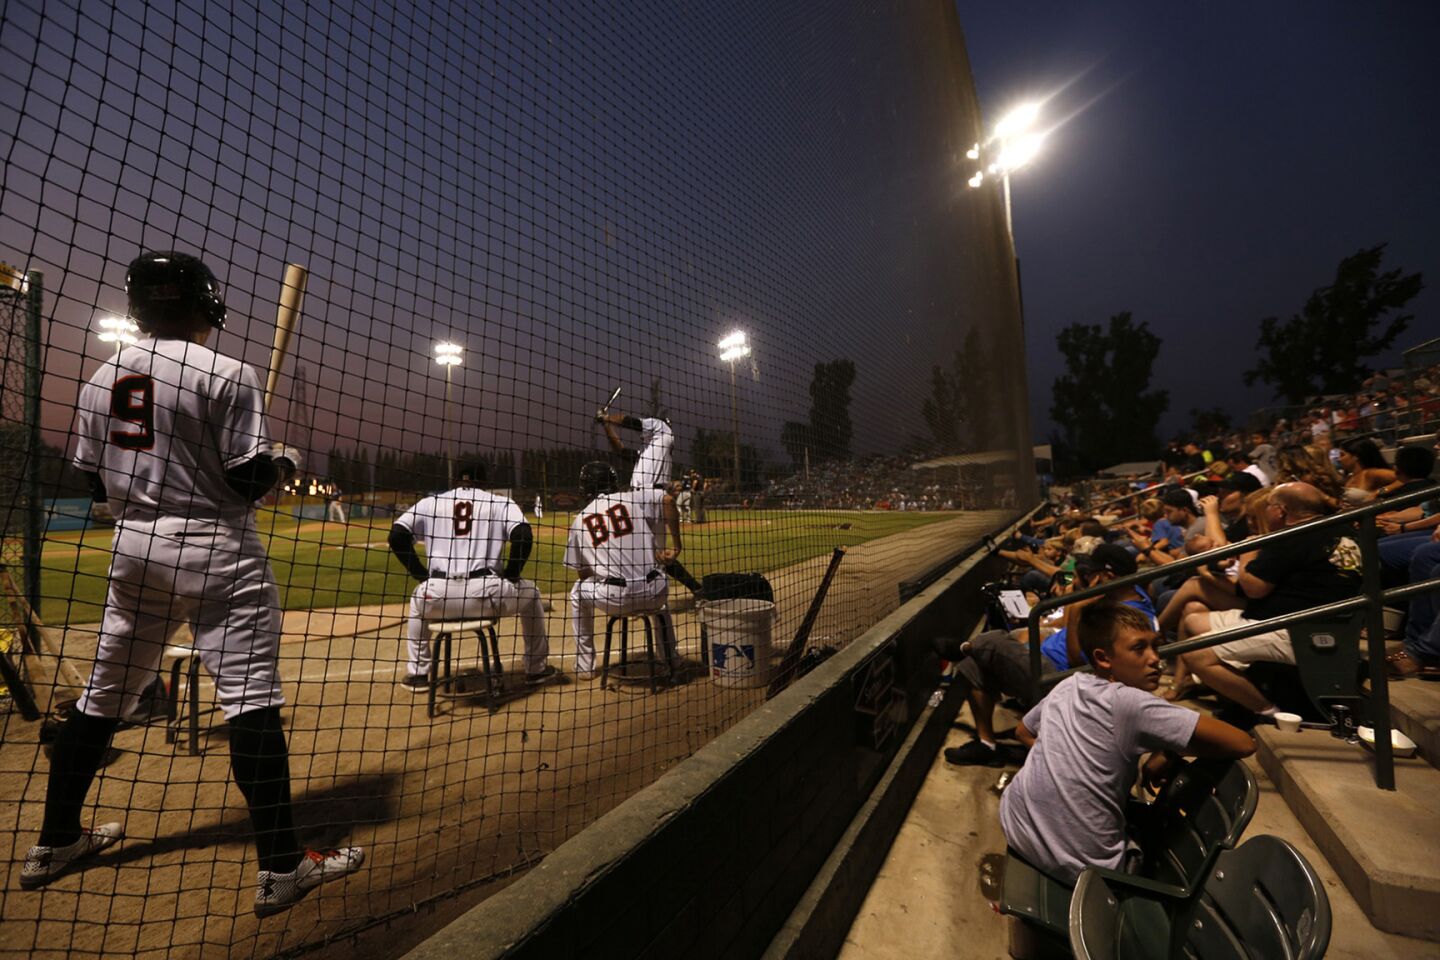 Bakersfield Blaze player Braden Bishop, left, prepares for his at-bat while fans take in one of their last games at Sam Lynn Ballpark. When the season ends and the team folds, it will bring to close 75 years of baseball in the Central California city.